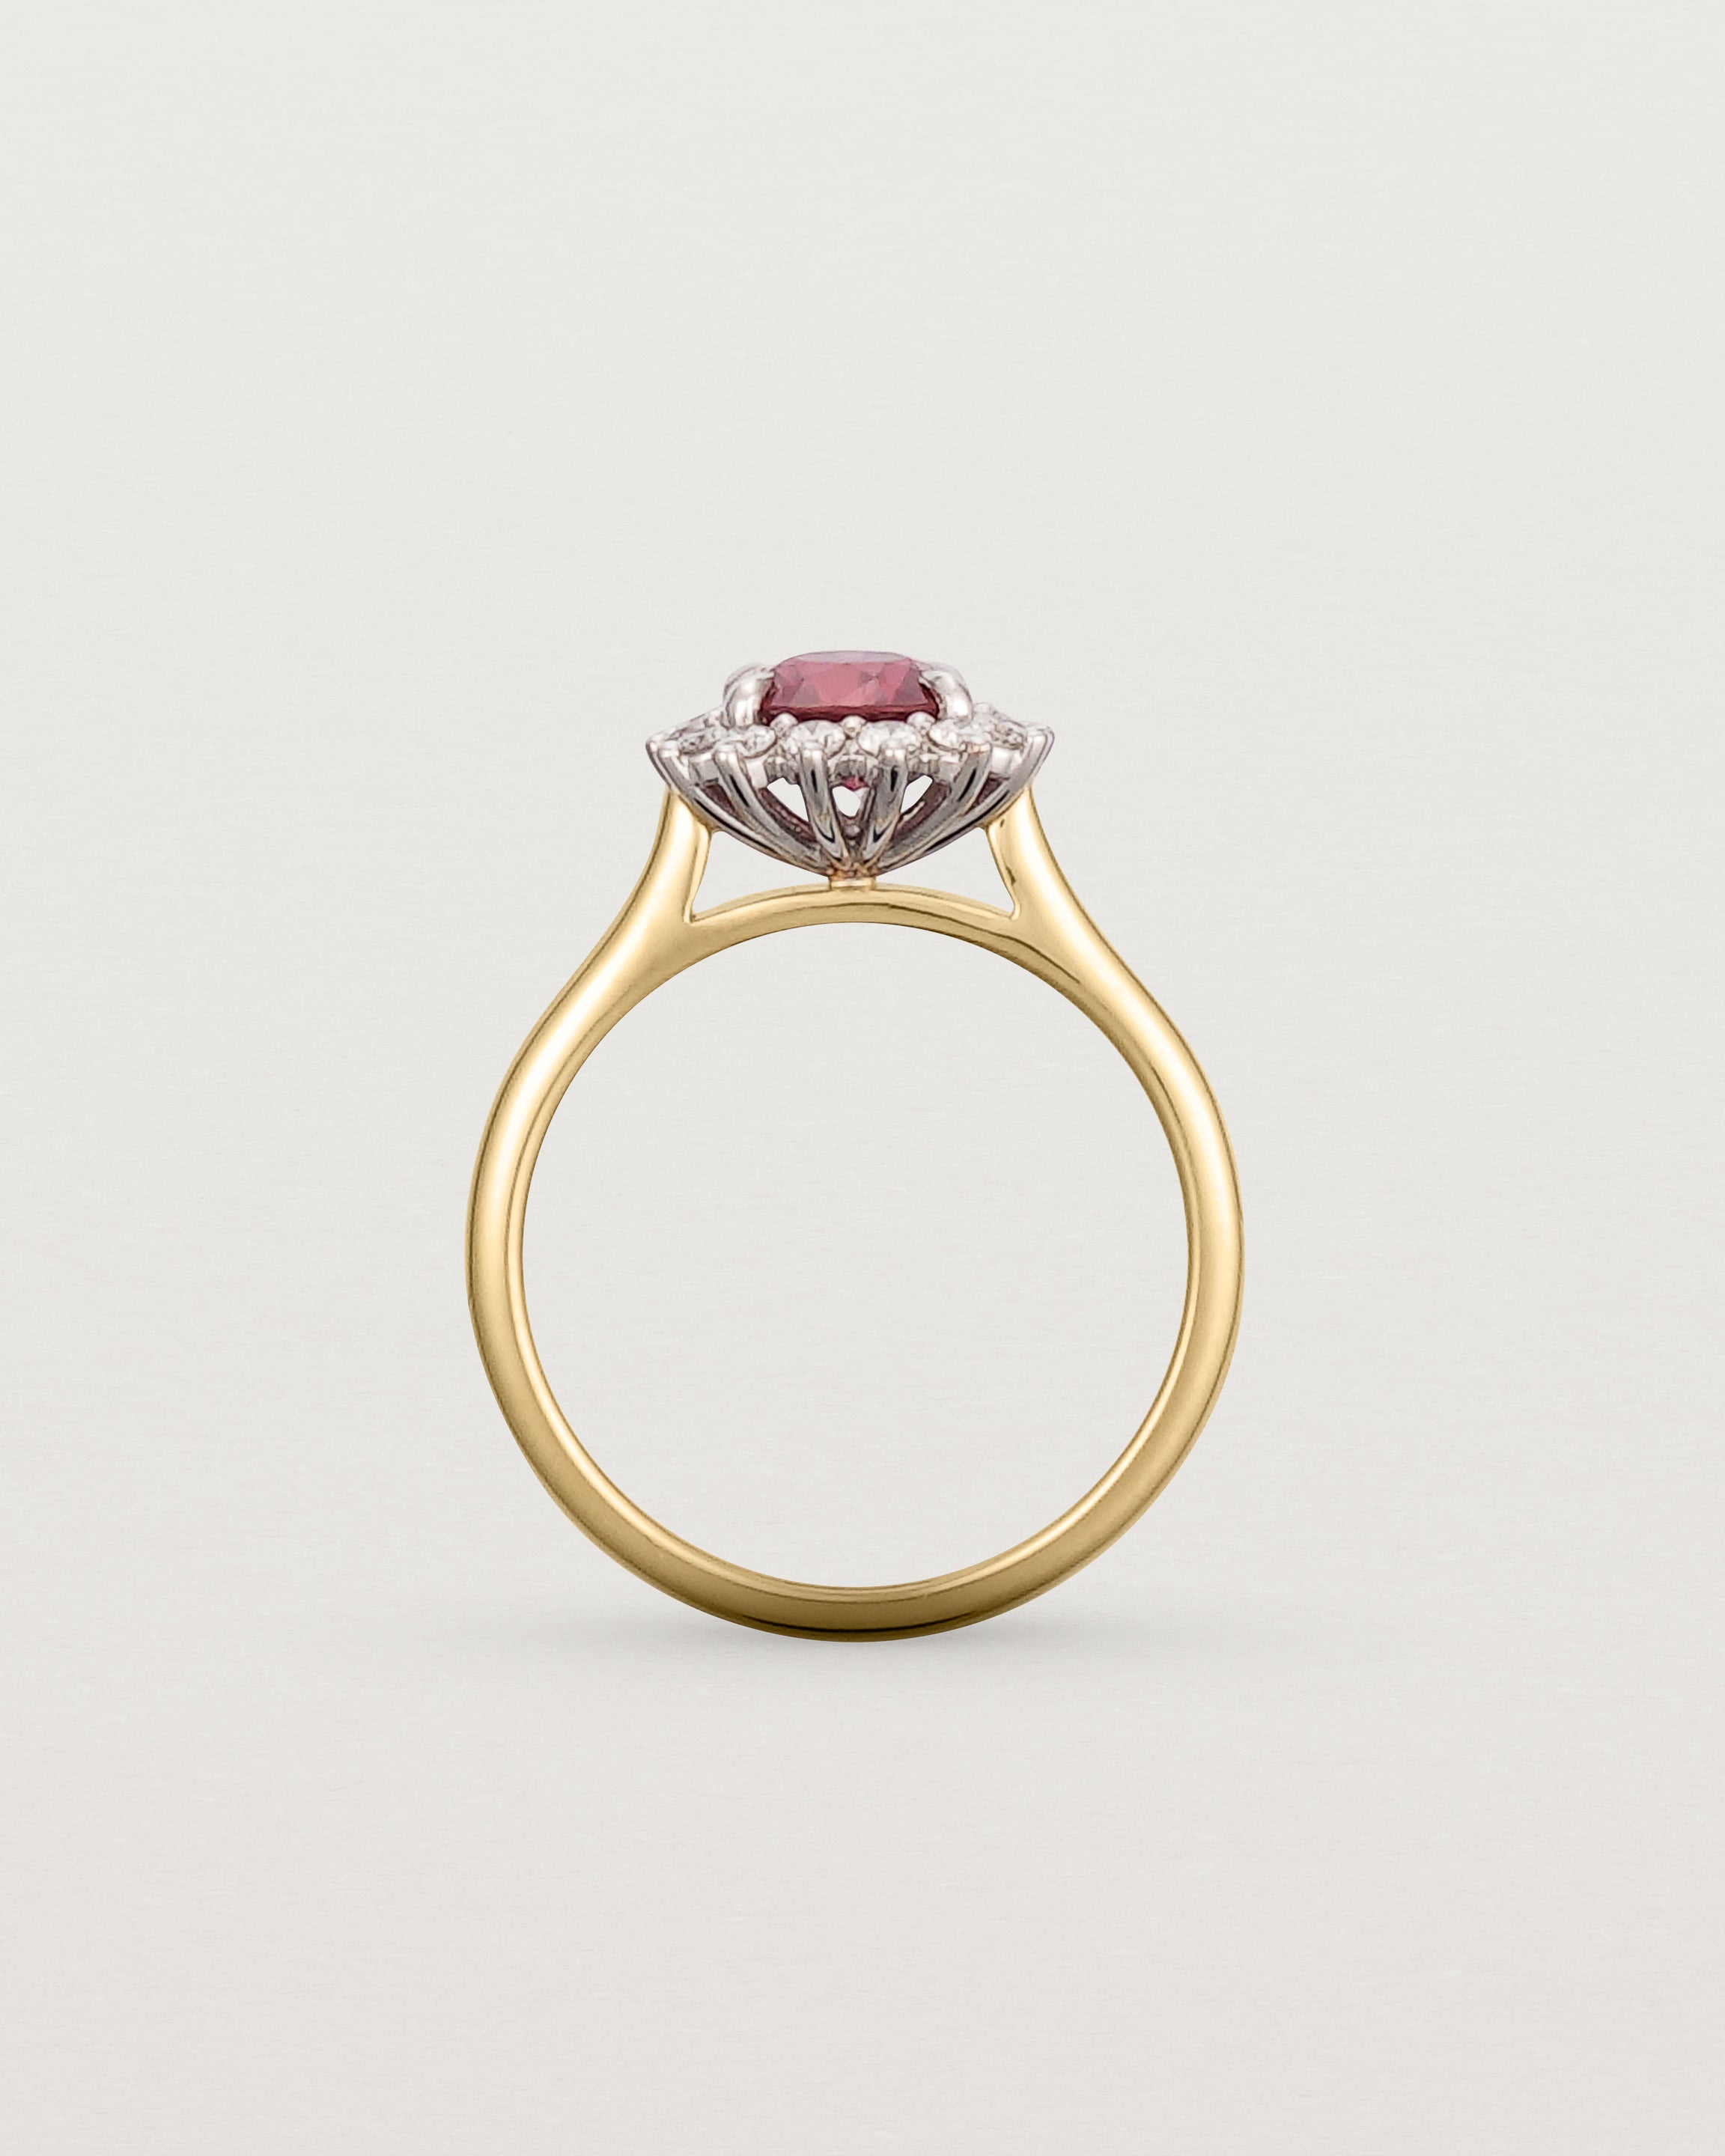 Standing view of the Amelia Daisy Halo | Ruby & Diamond | Yellow Gold.